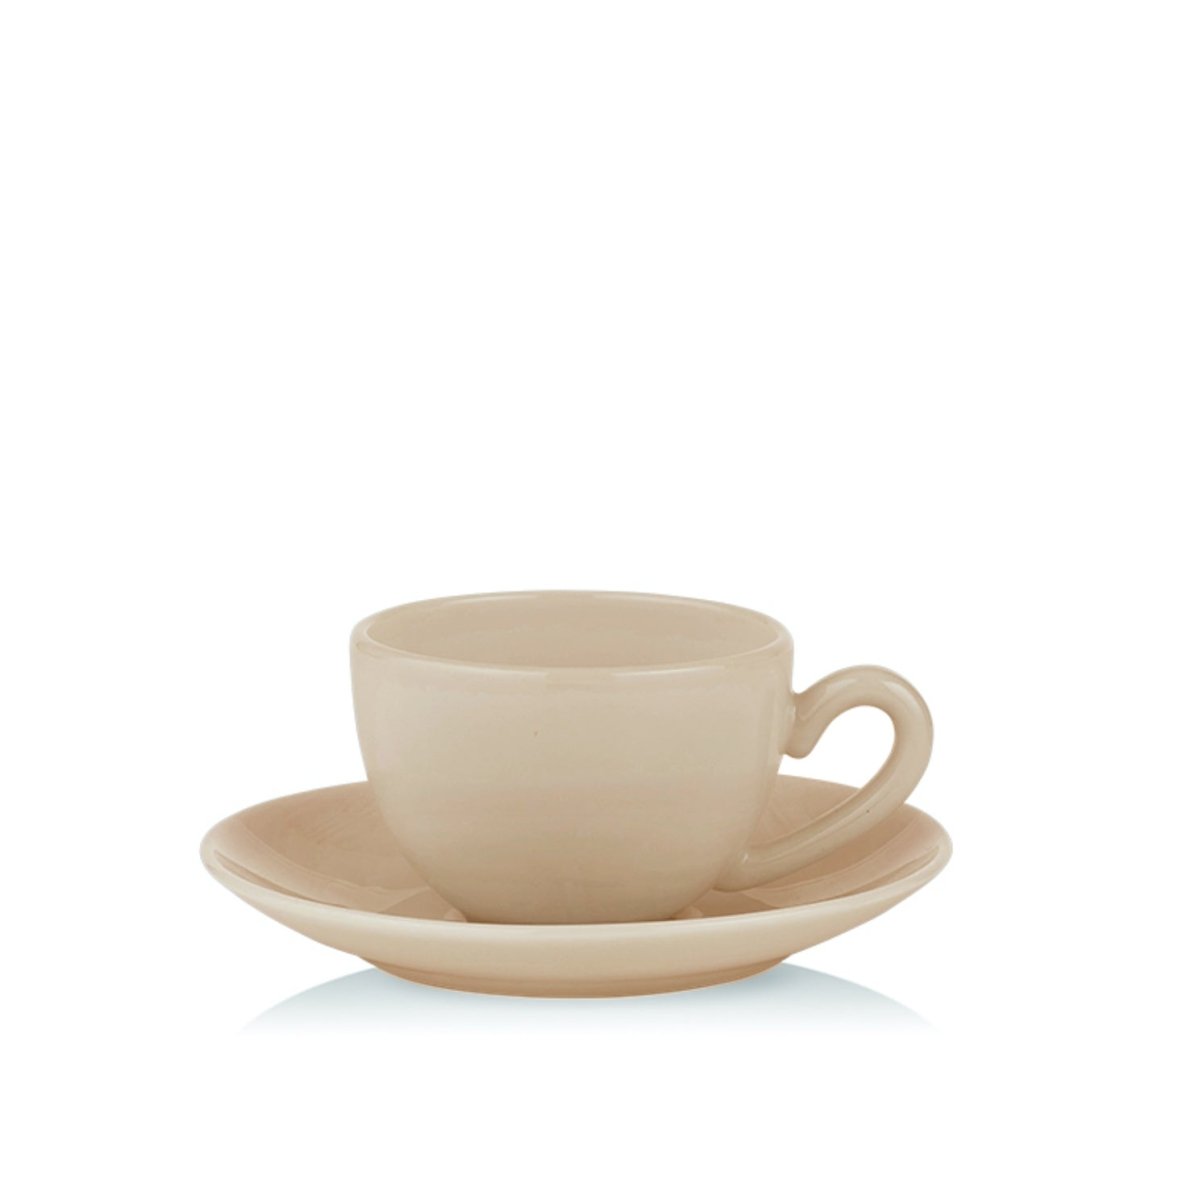 MILK Cup with Saucer by Lucie Kaas